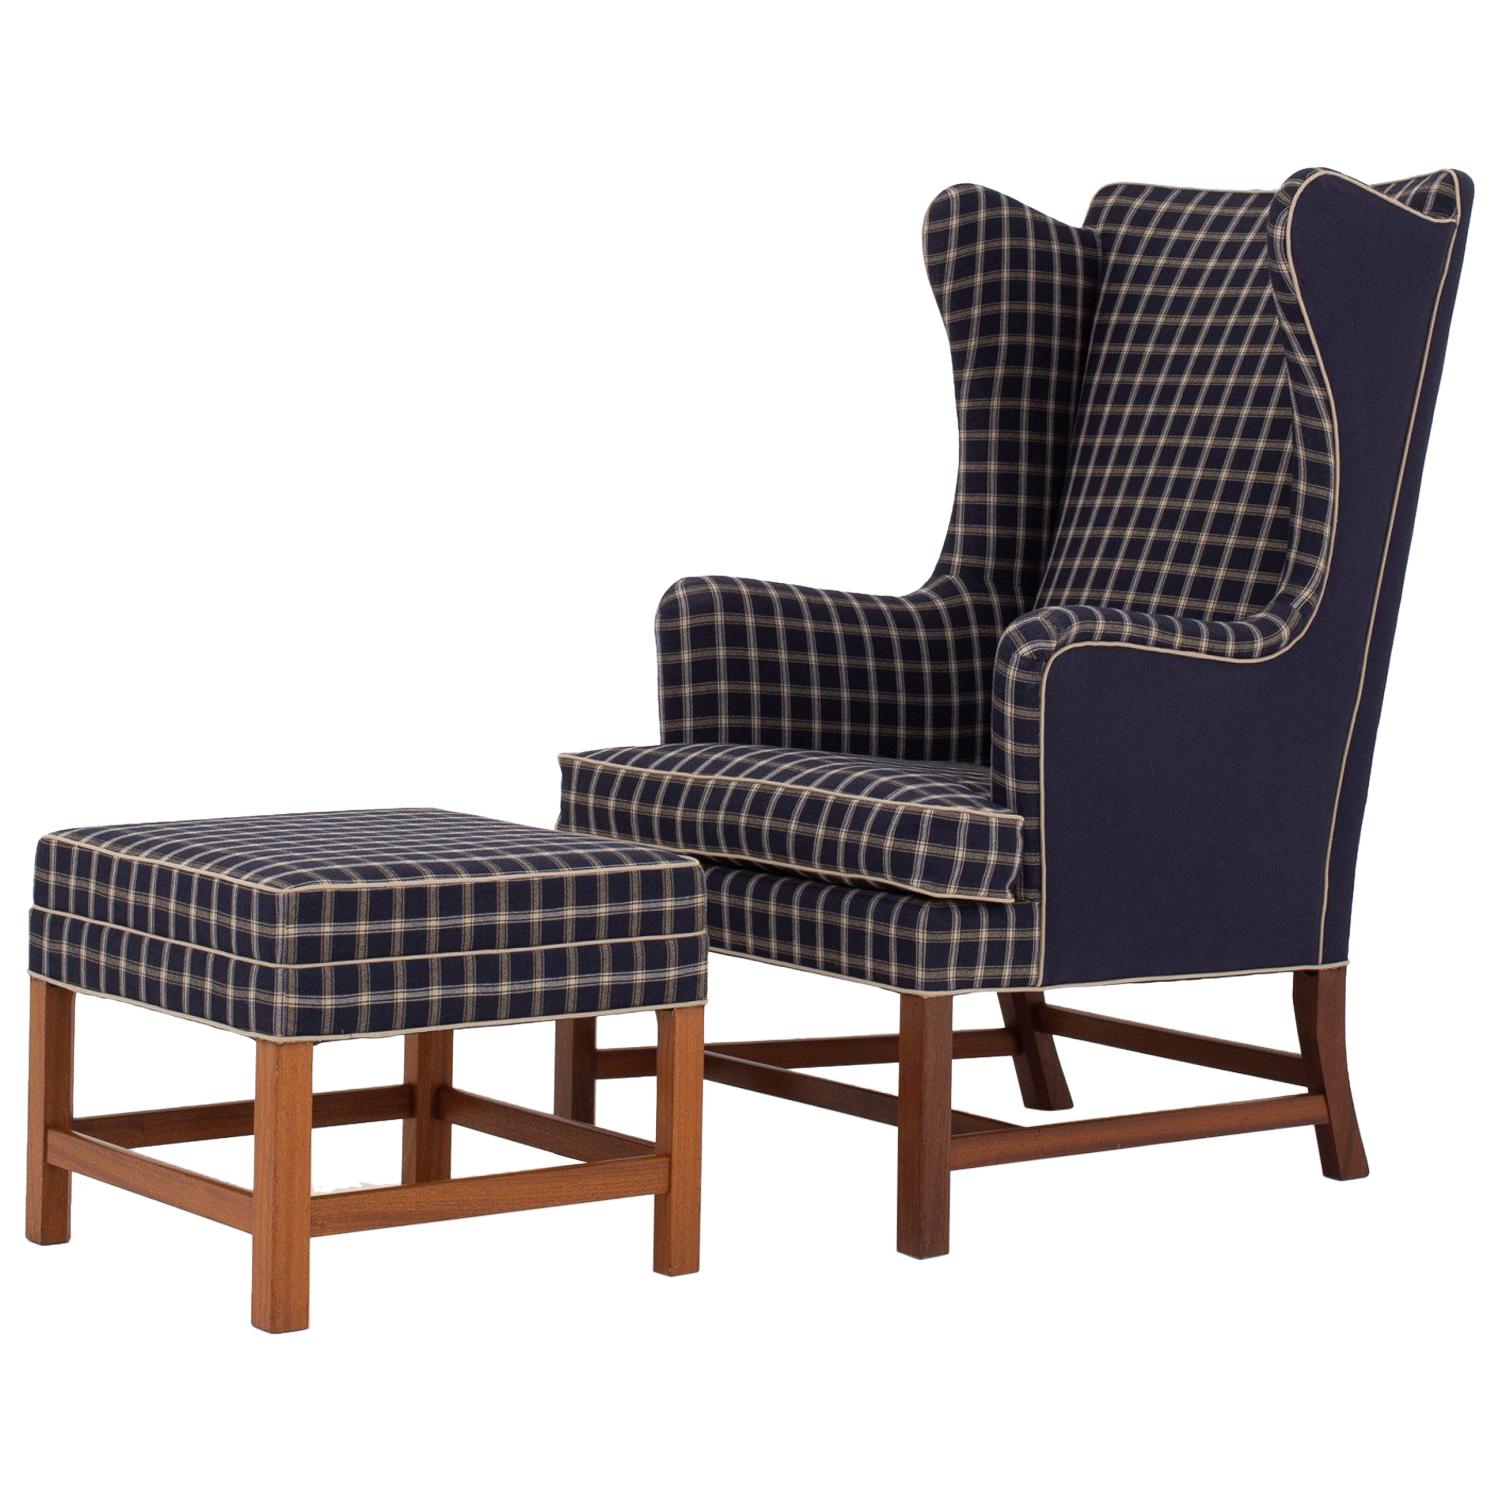 Kaare Klint Wingback Chair And Stool For Sale At 1stdibs